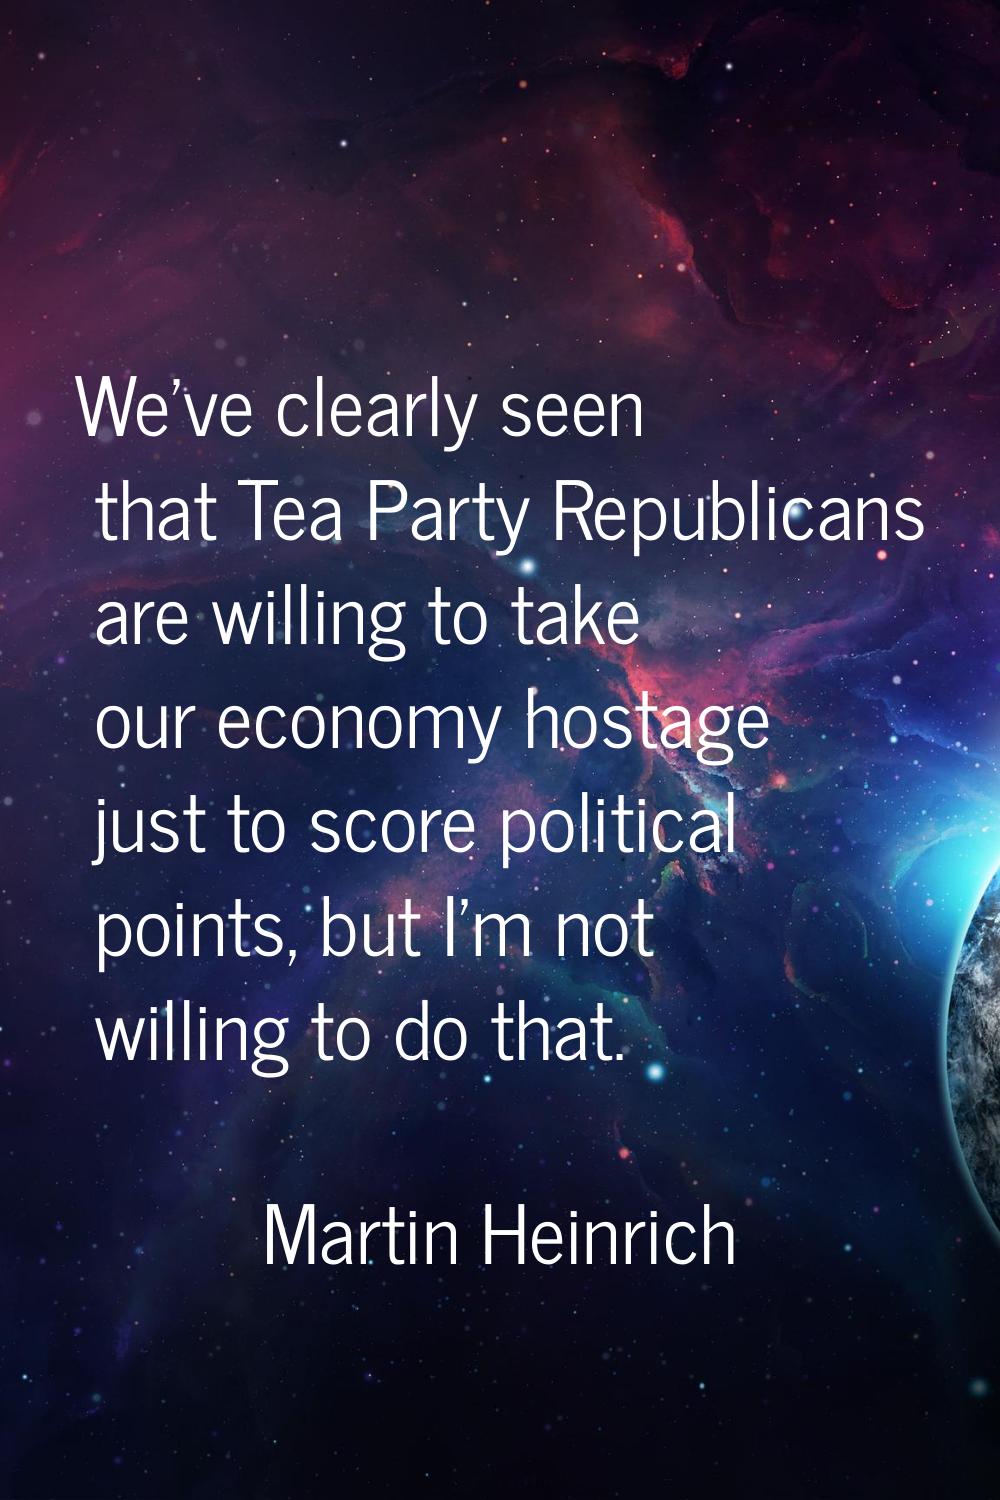 We've clearly seen that Tea Party Republicans are willing to take our economy hostage just to score